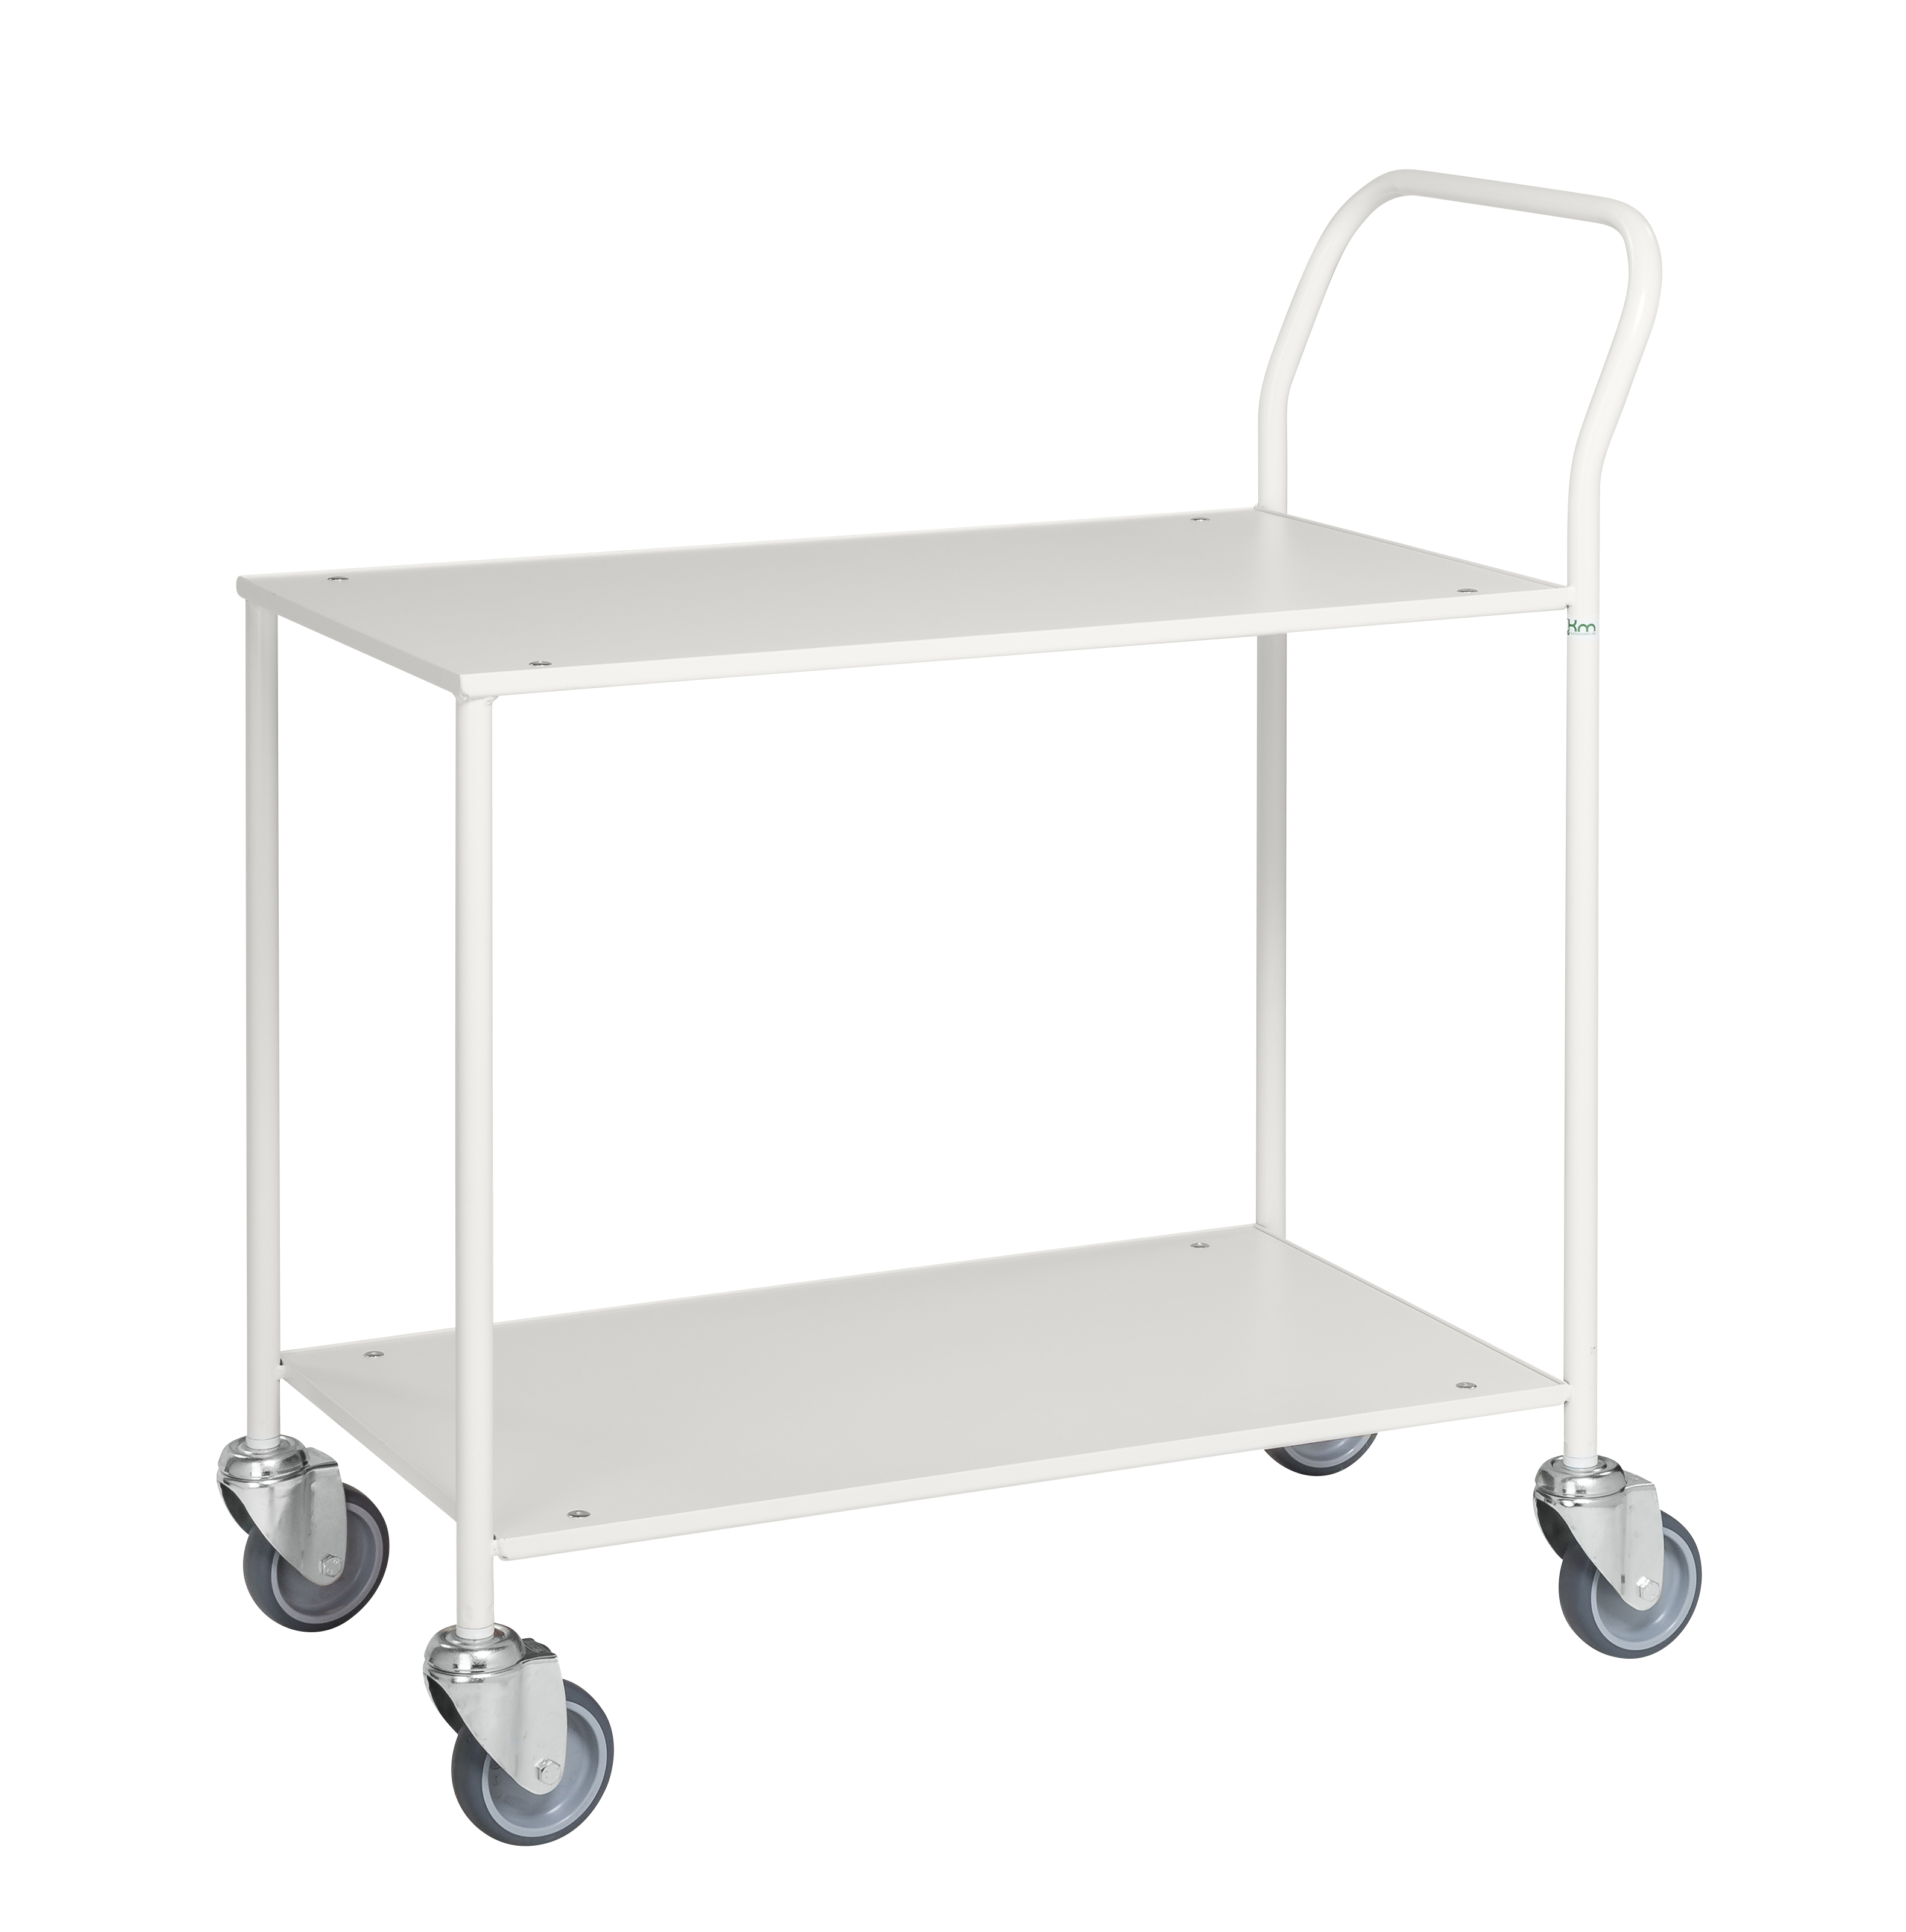 Small table trolley, fully welded KM173-6B